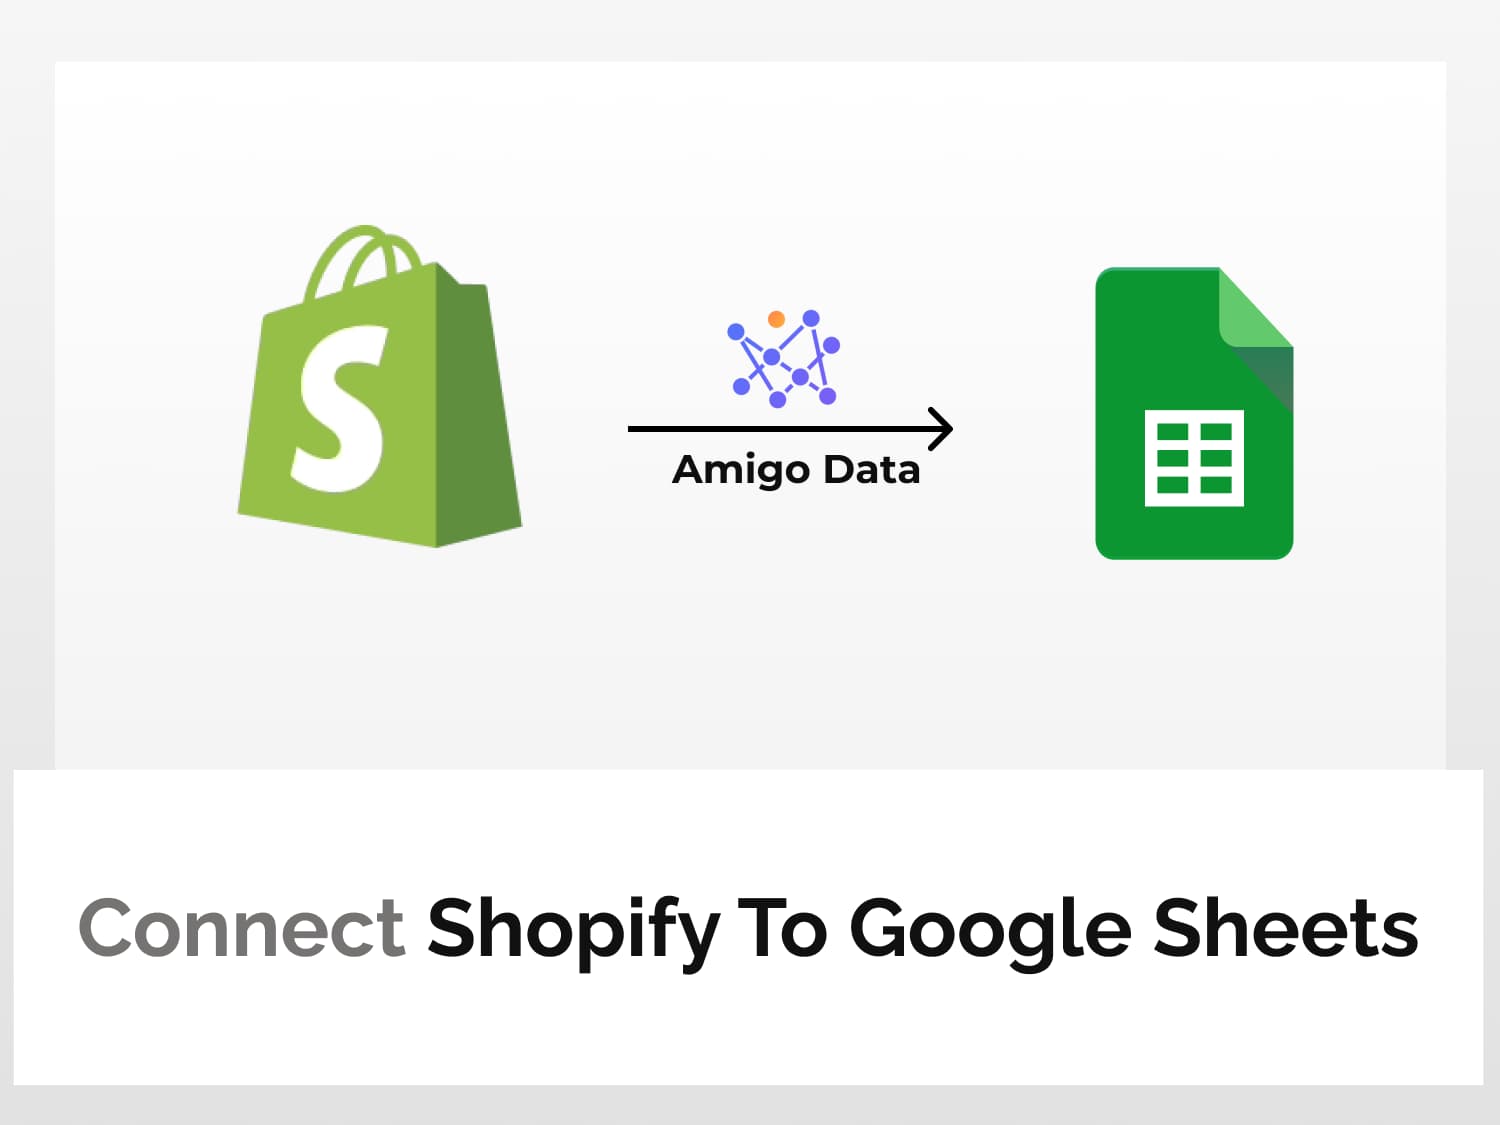 How to connect Shopify to Google Sheets